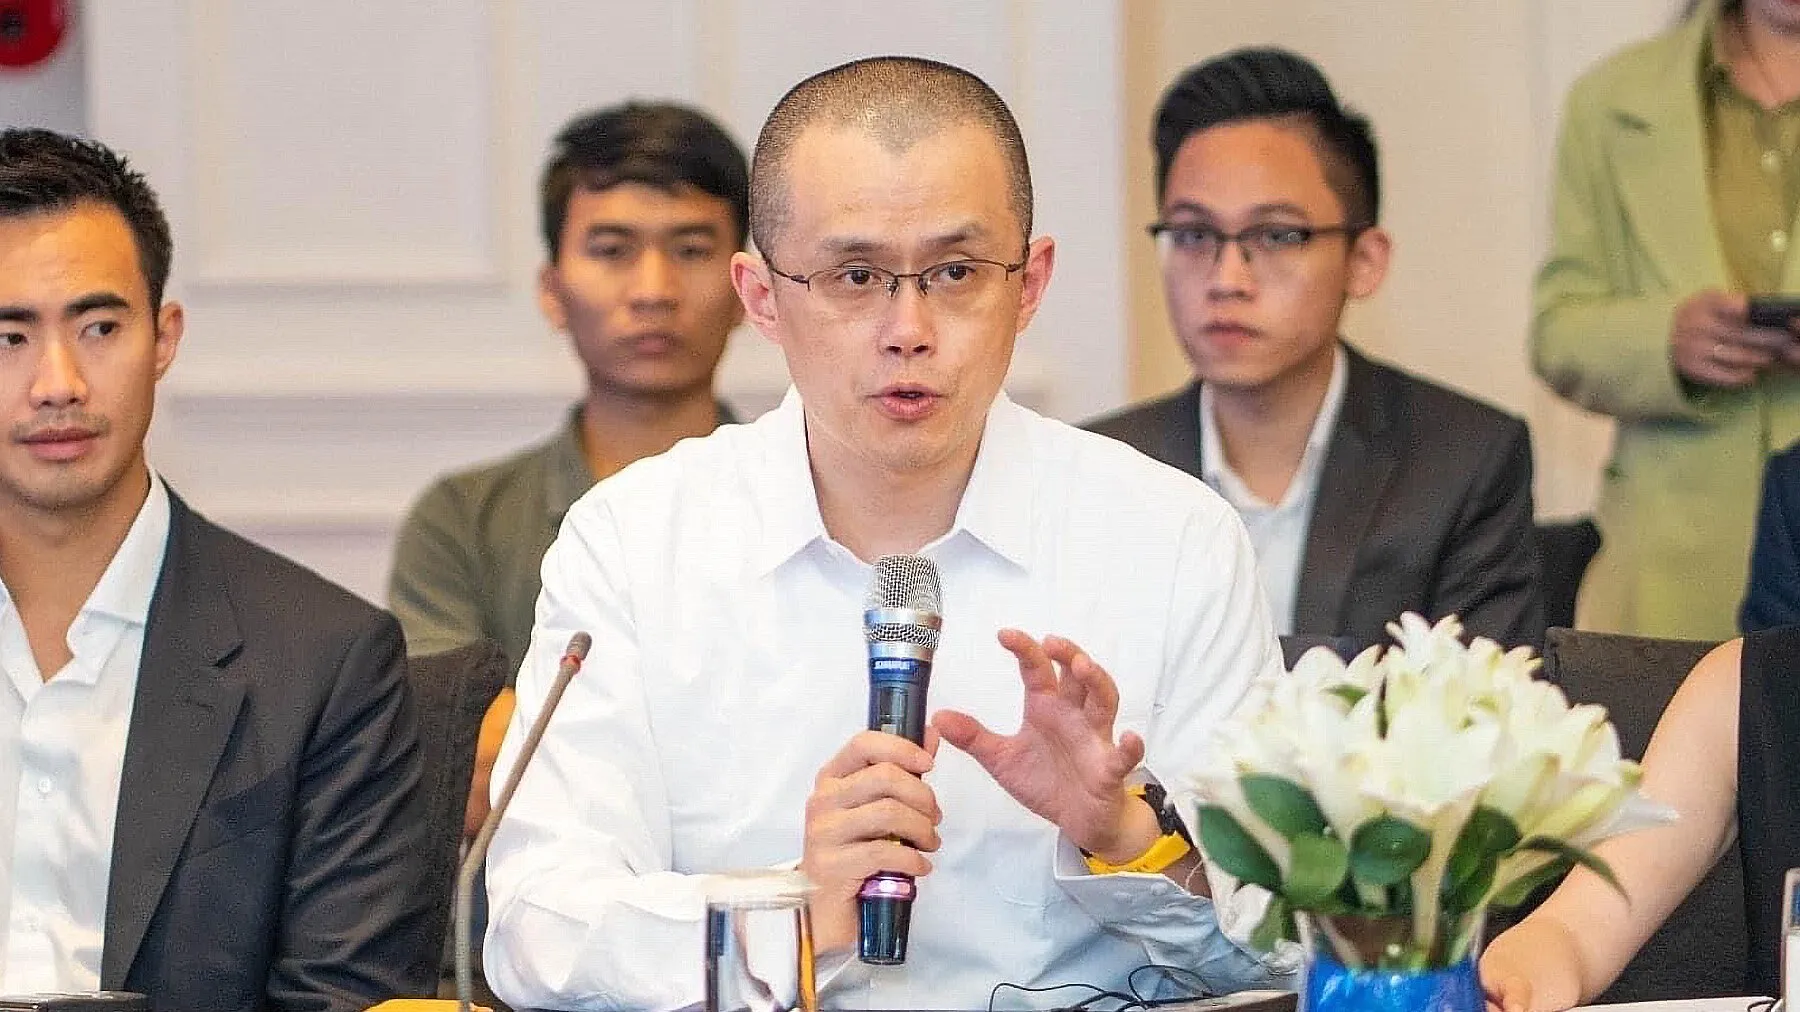 Changpeng ”CZ” Zhao speaking at the Vietnam NFT Summit in 2022. Image: Aevozer/Wikimedia Commons